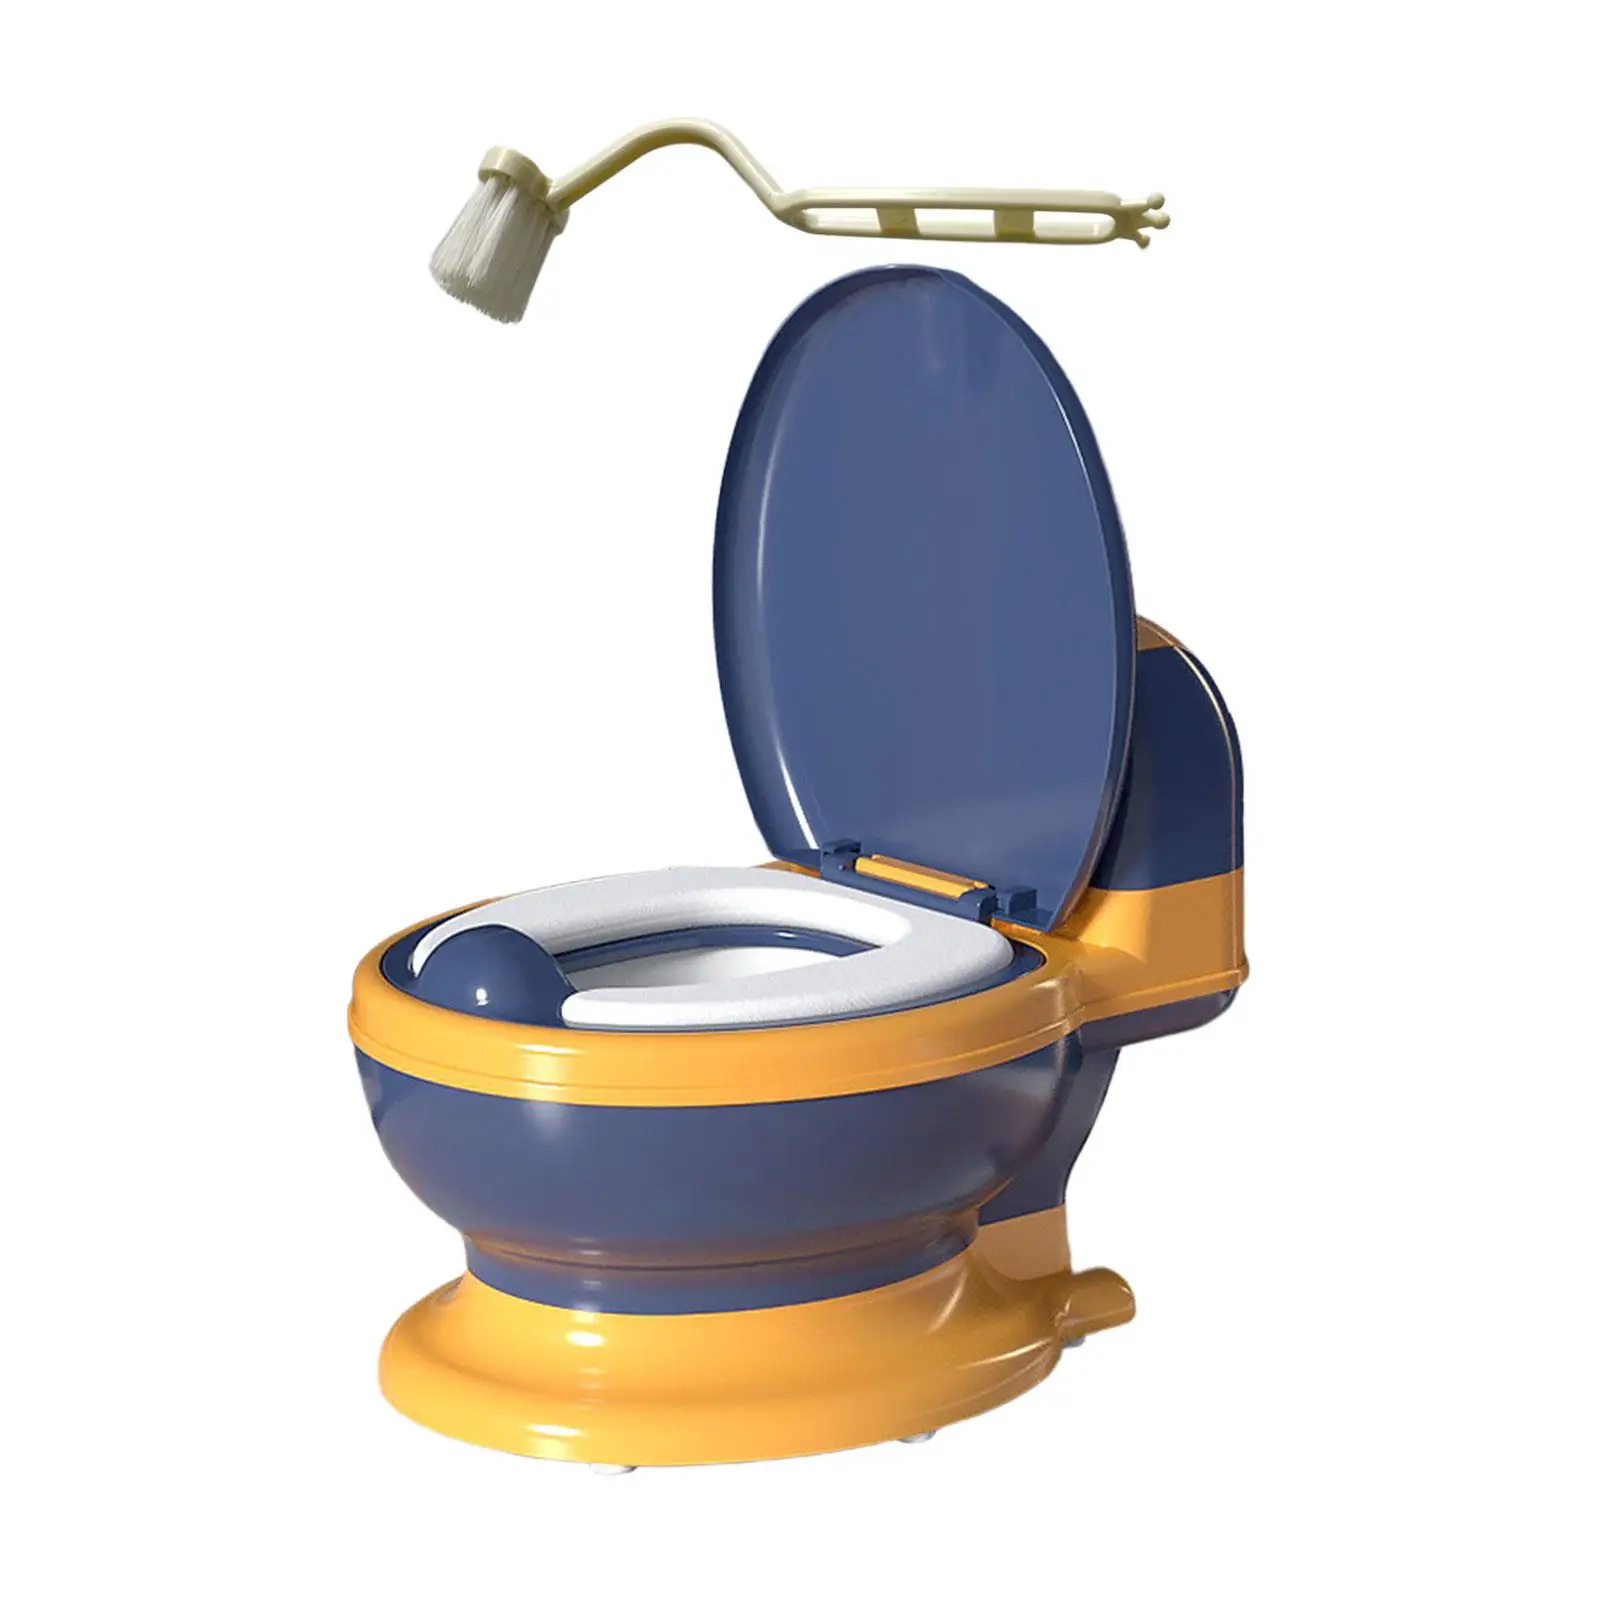 Toilet Training Potty Includes Cleaning Brush Compact Size Comfortable with Wipe Storage Real Feel Potty Kids Infants Girls Boys